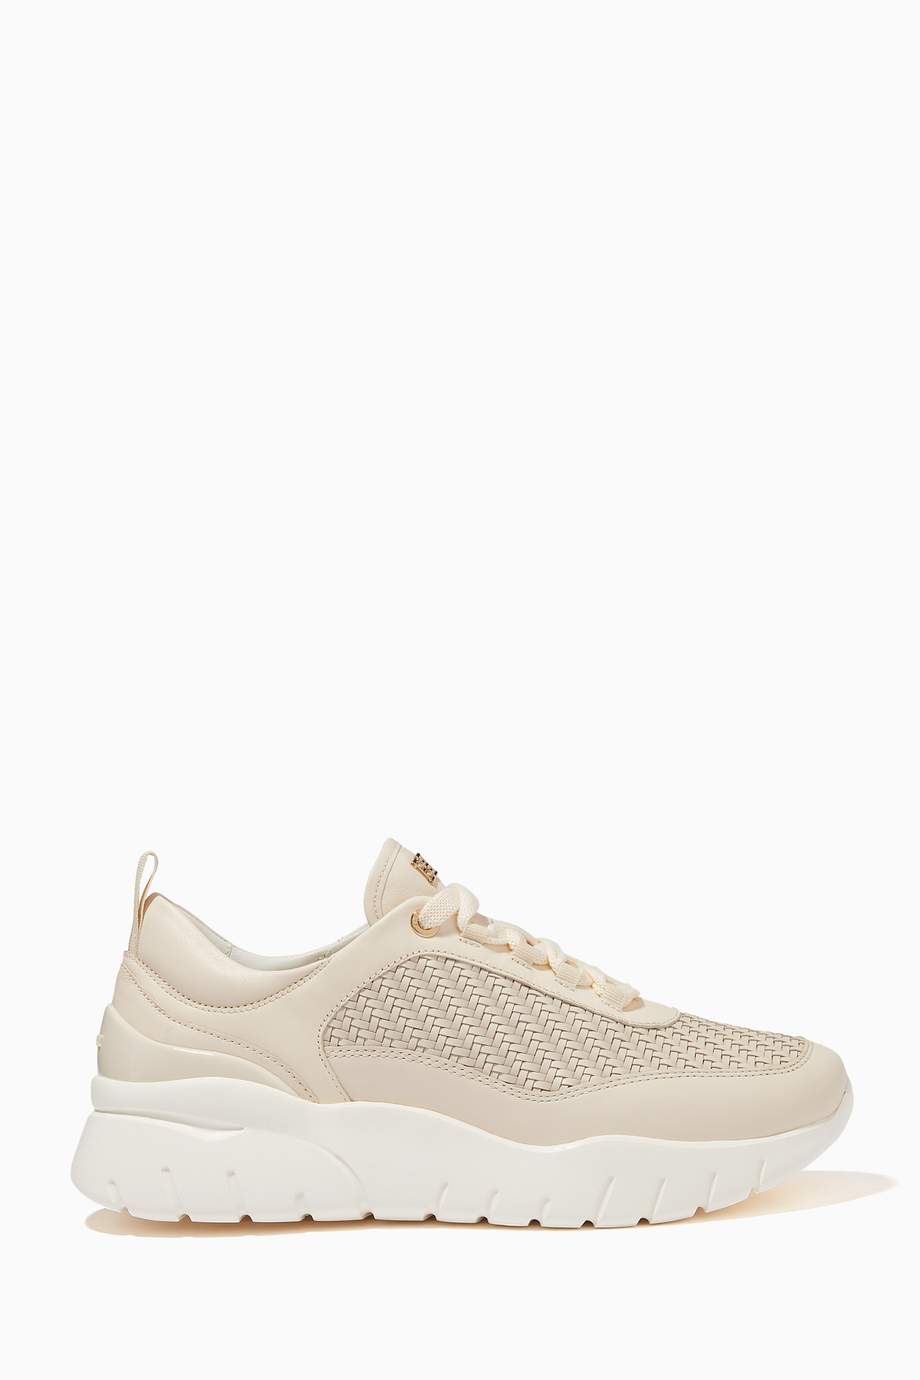 Shop Bally Neutral Biara Sneakers in Leather for Women | Ounass UAE